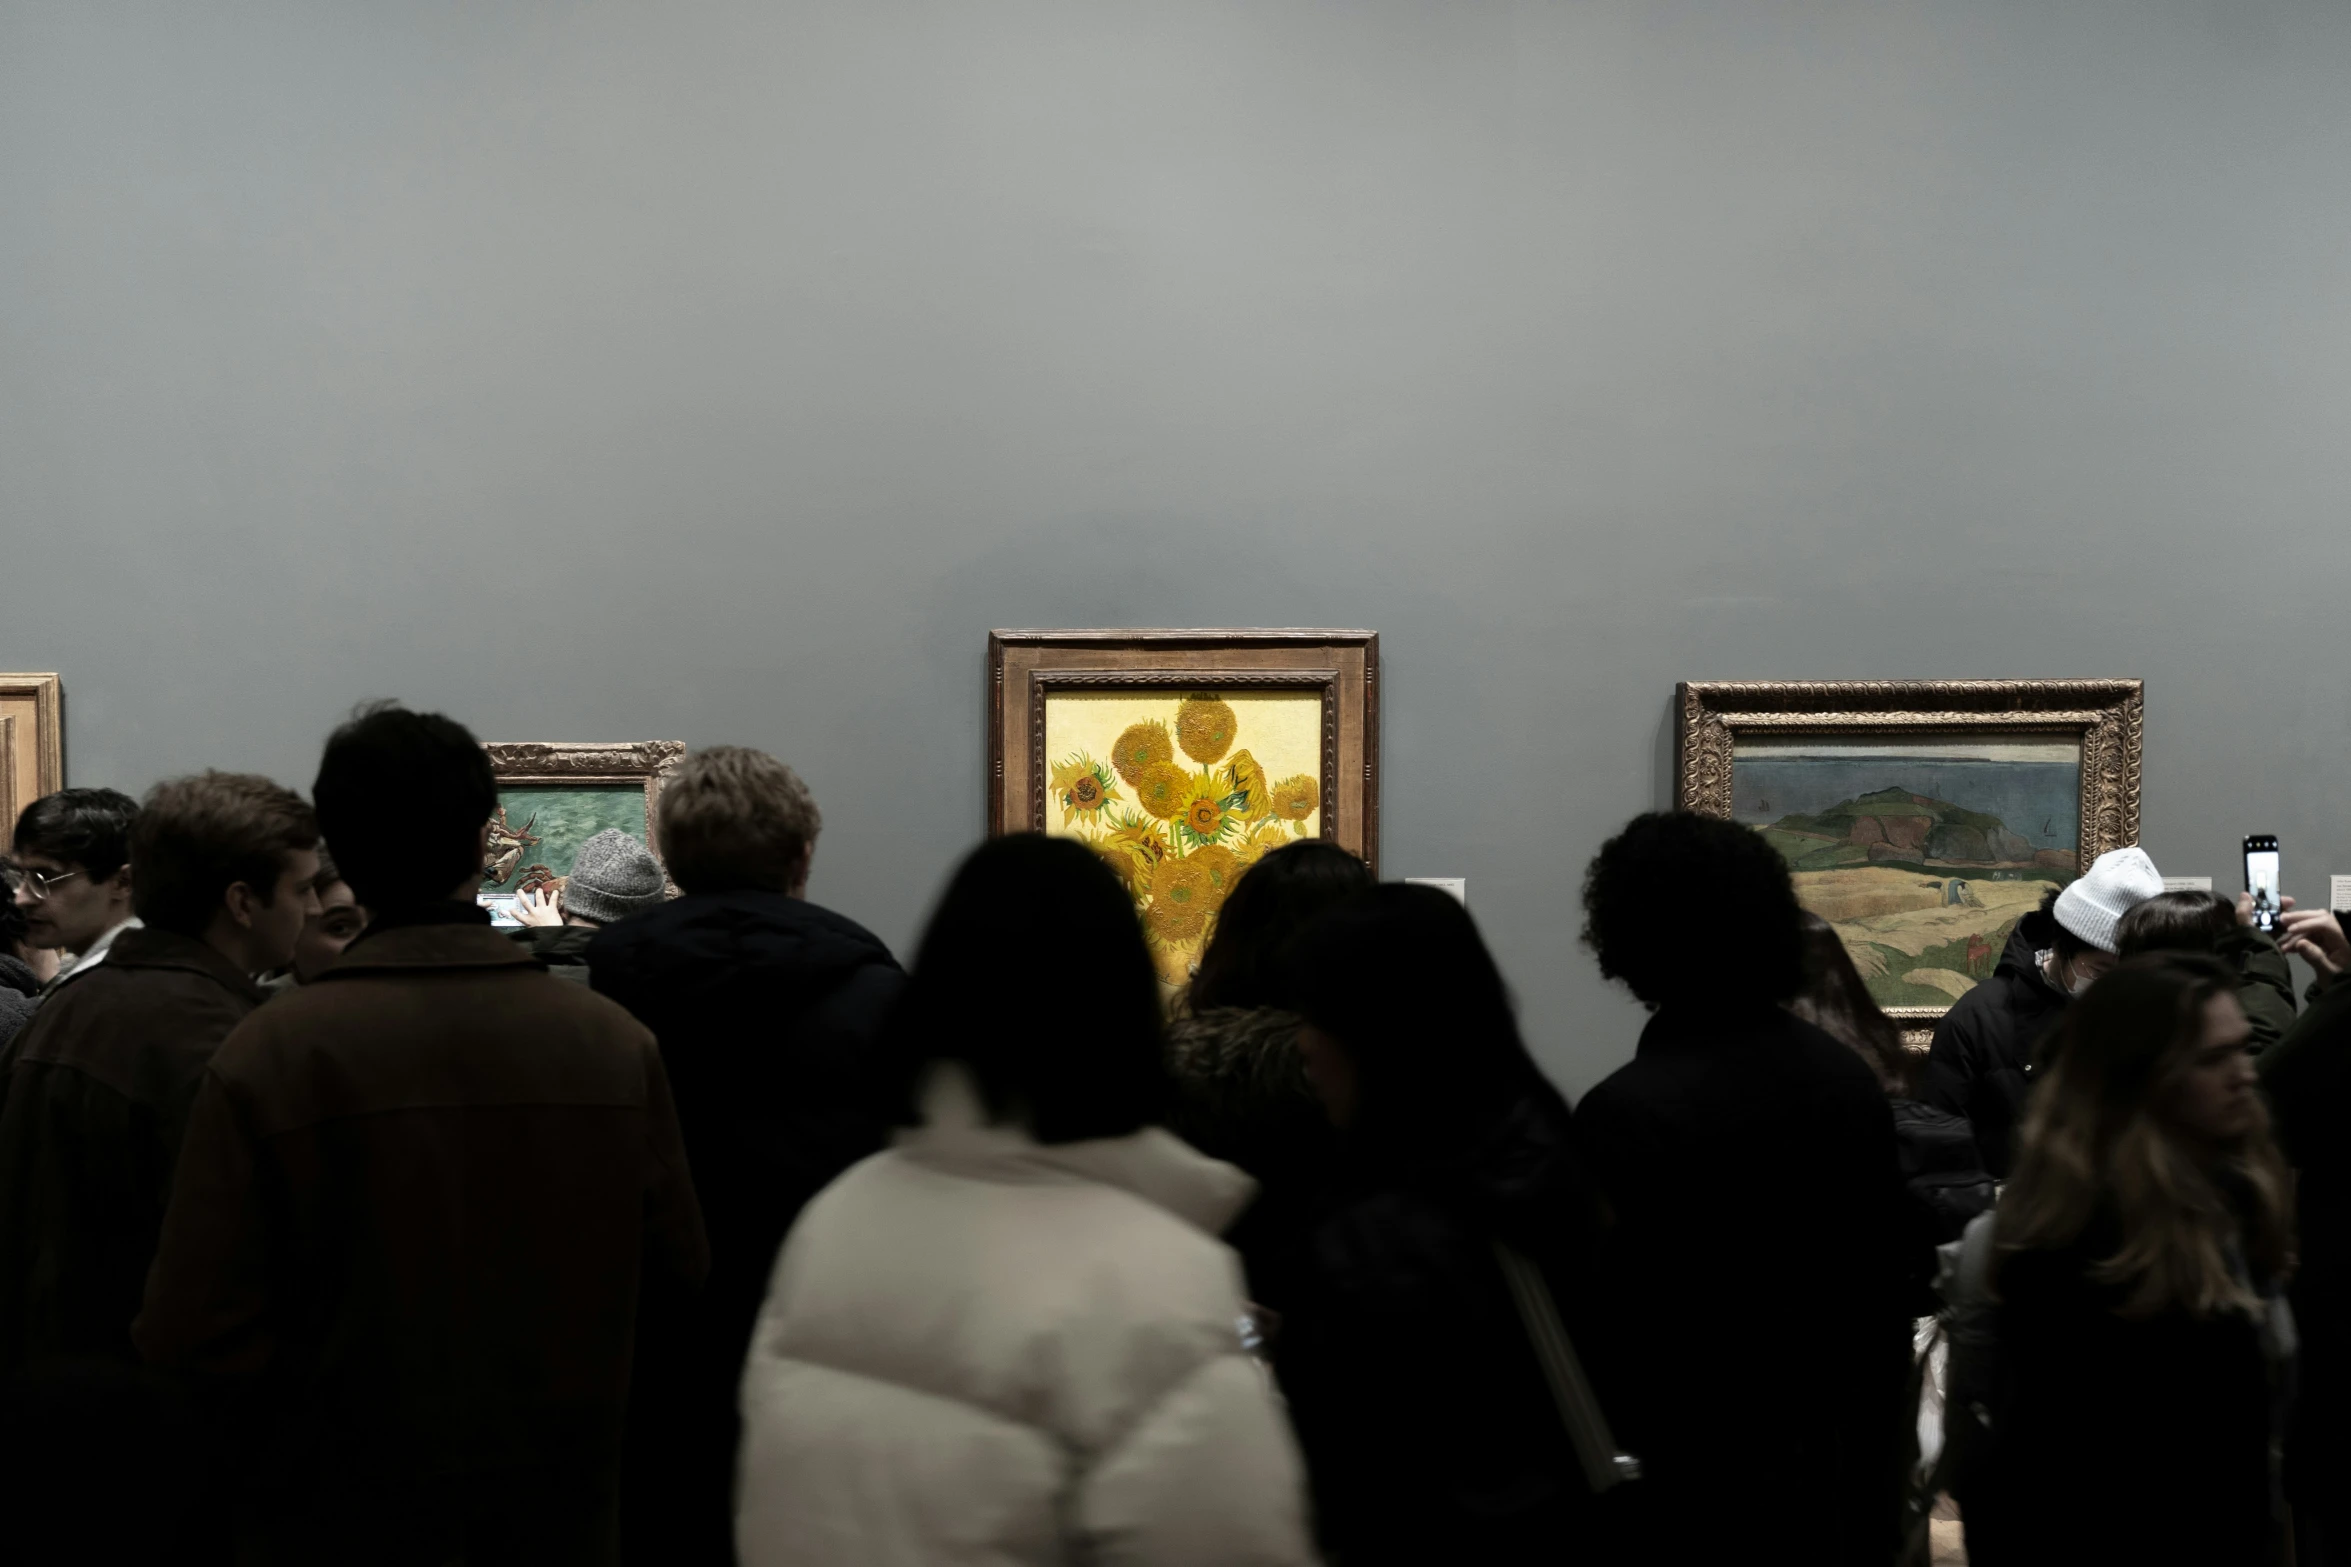 people looking at art in a museum with paintings on the wall